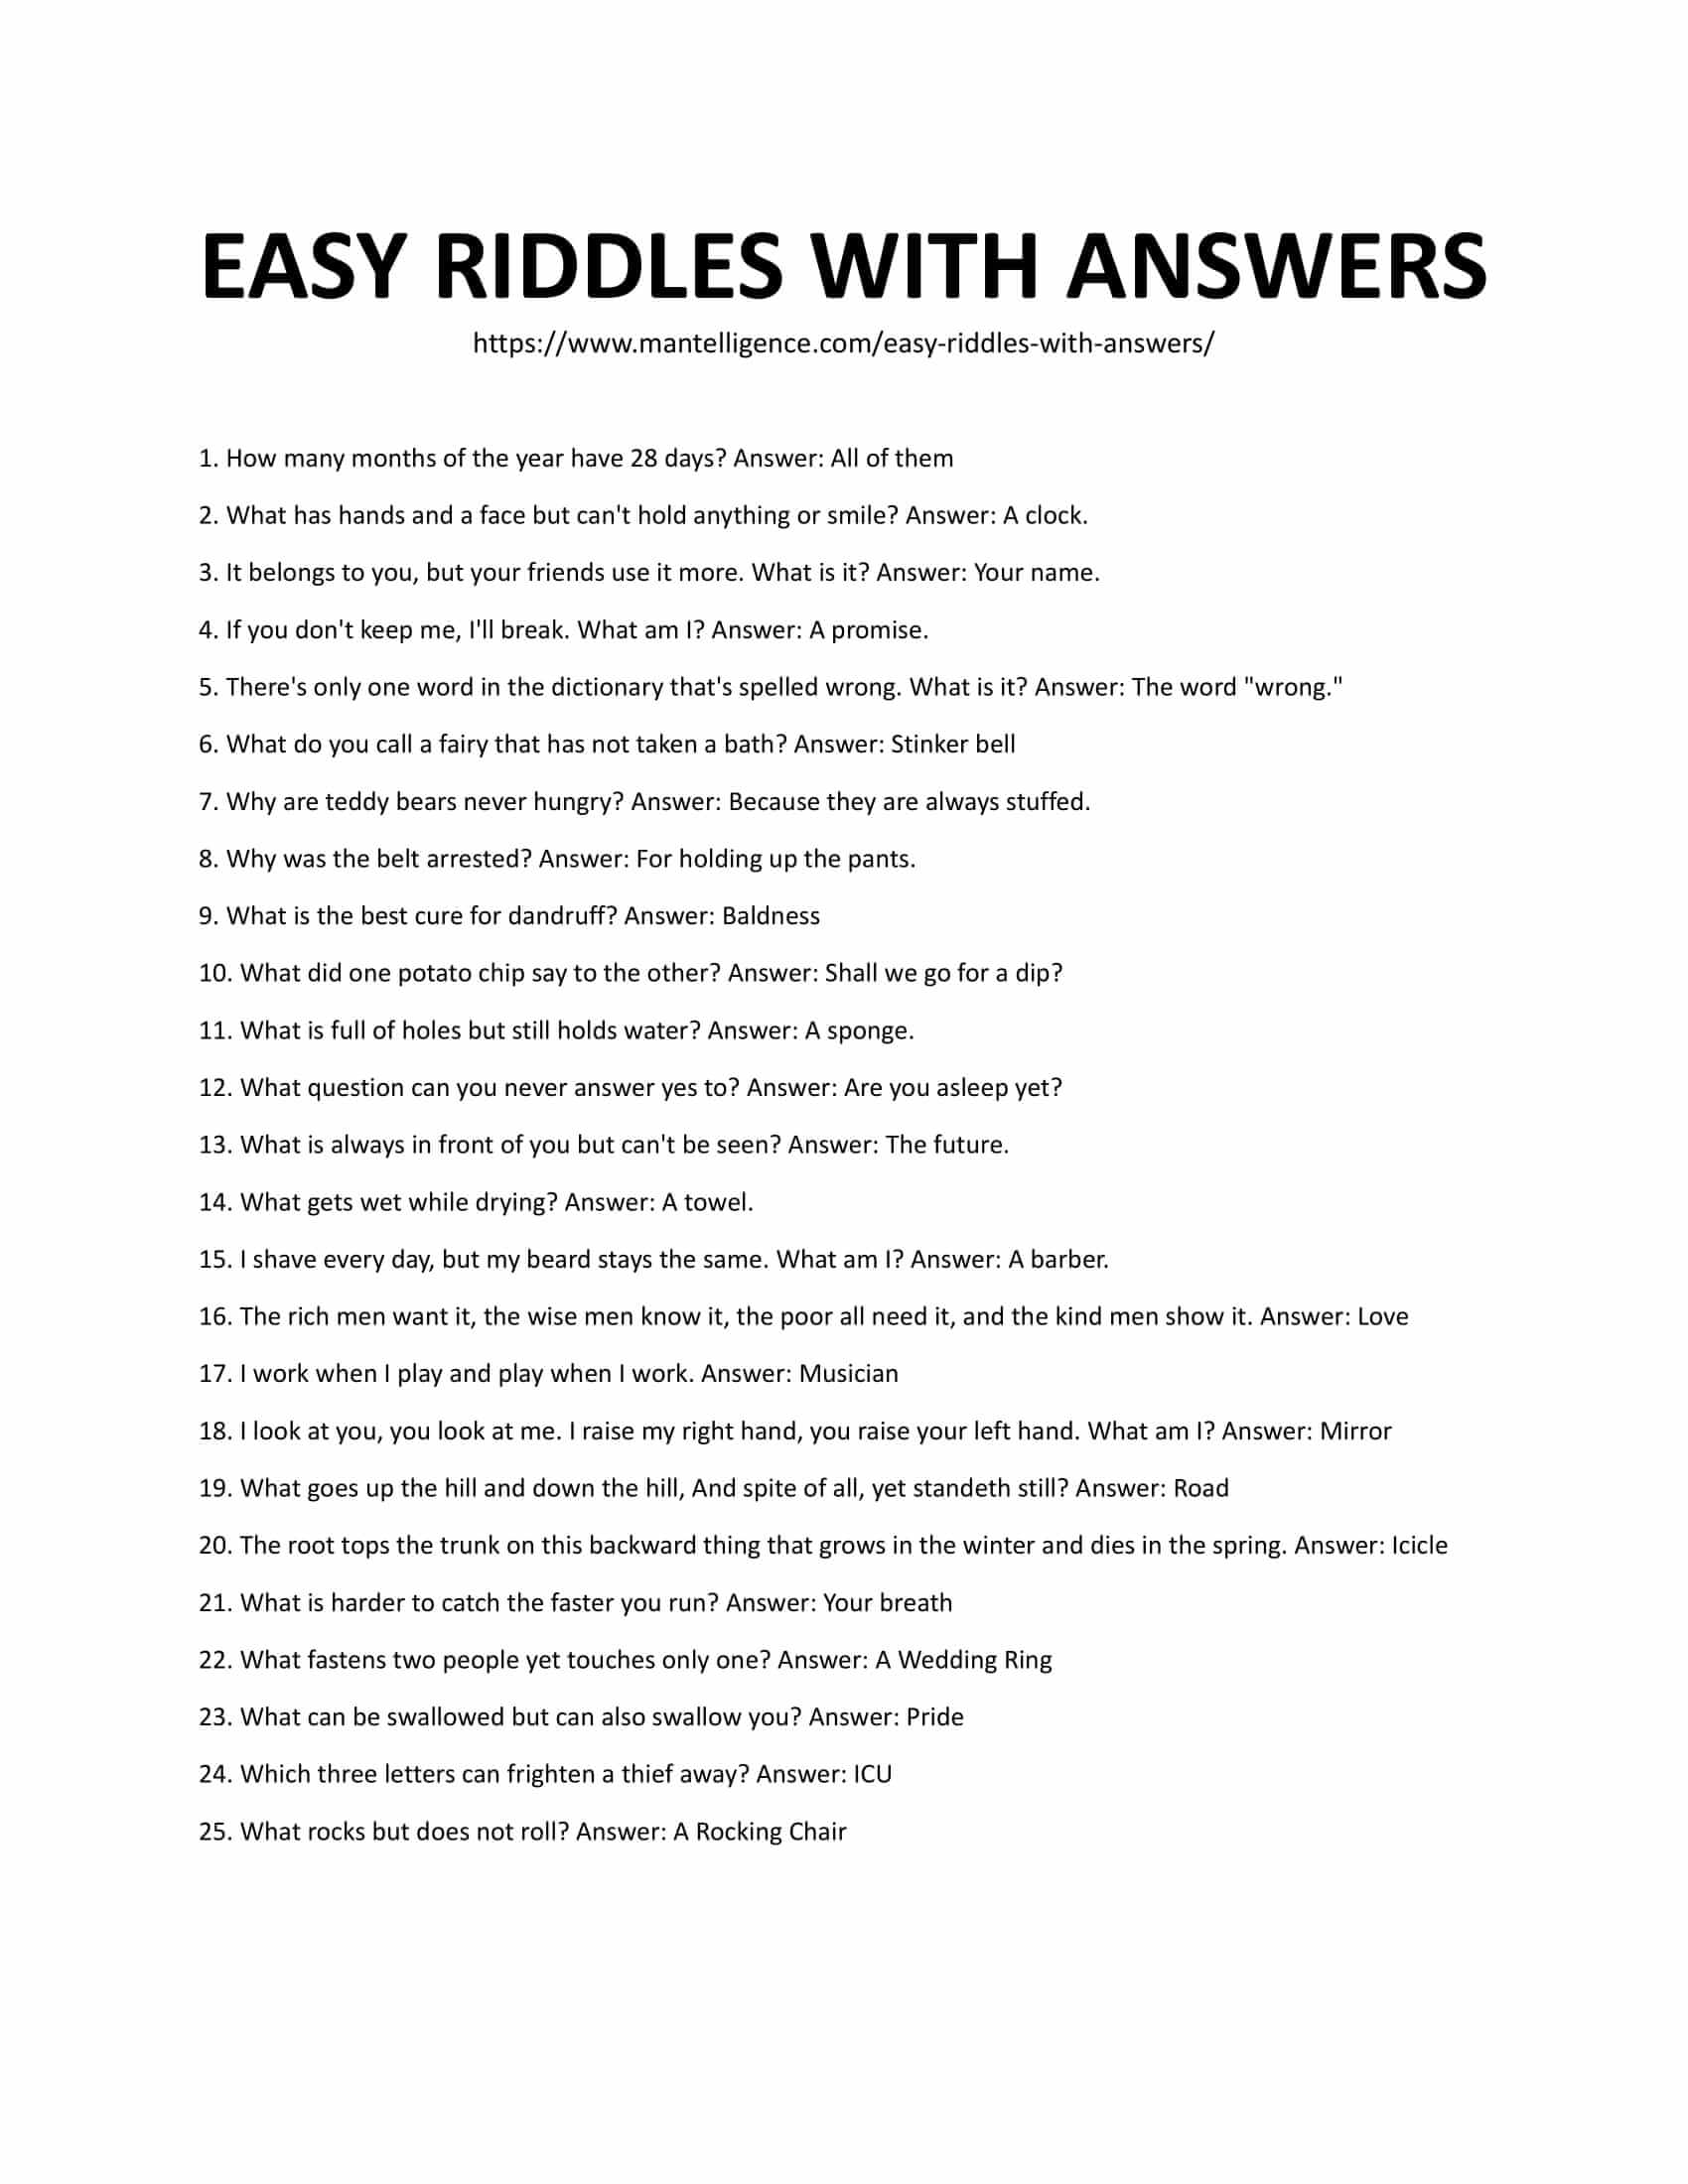 25 Easy Riddles With Answers See A Really Fun List of Questions (2022)